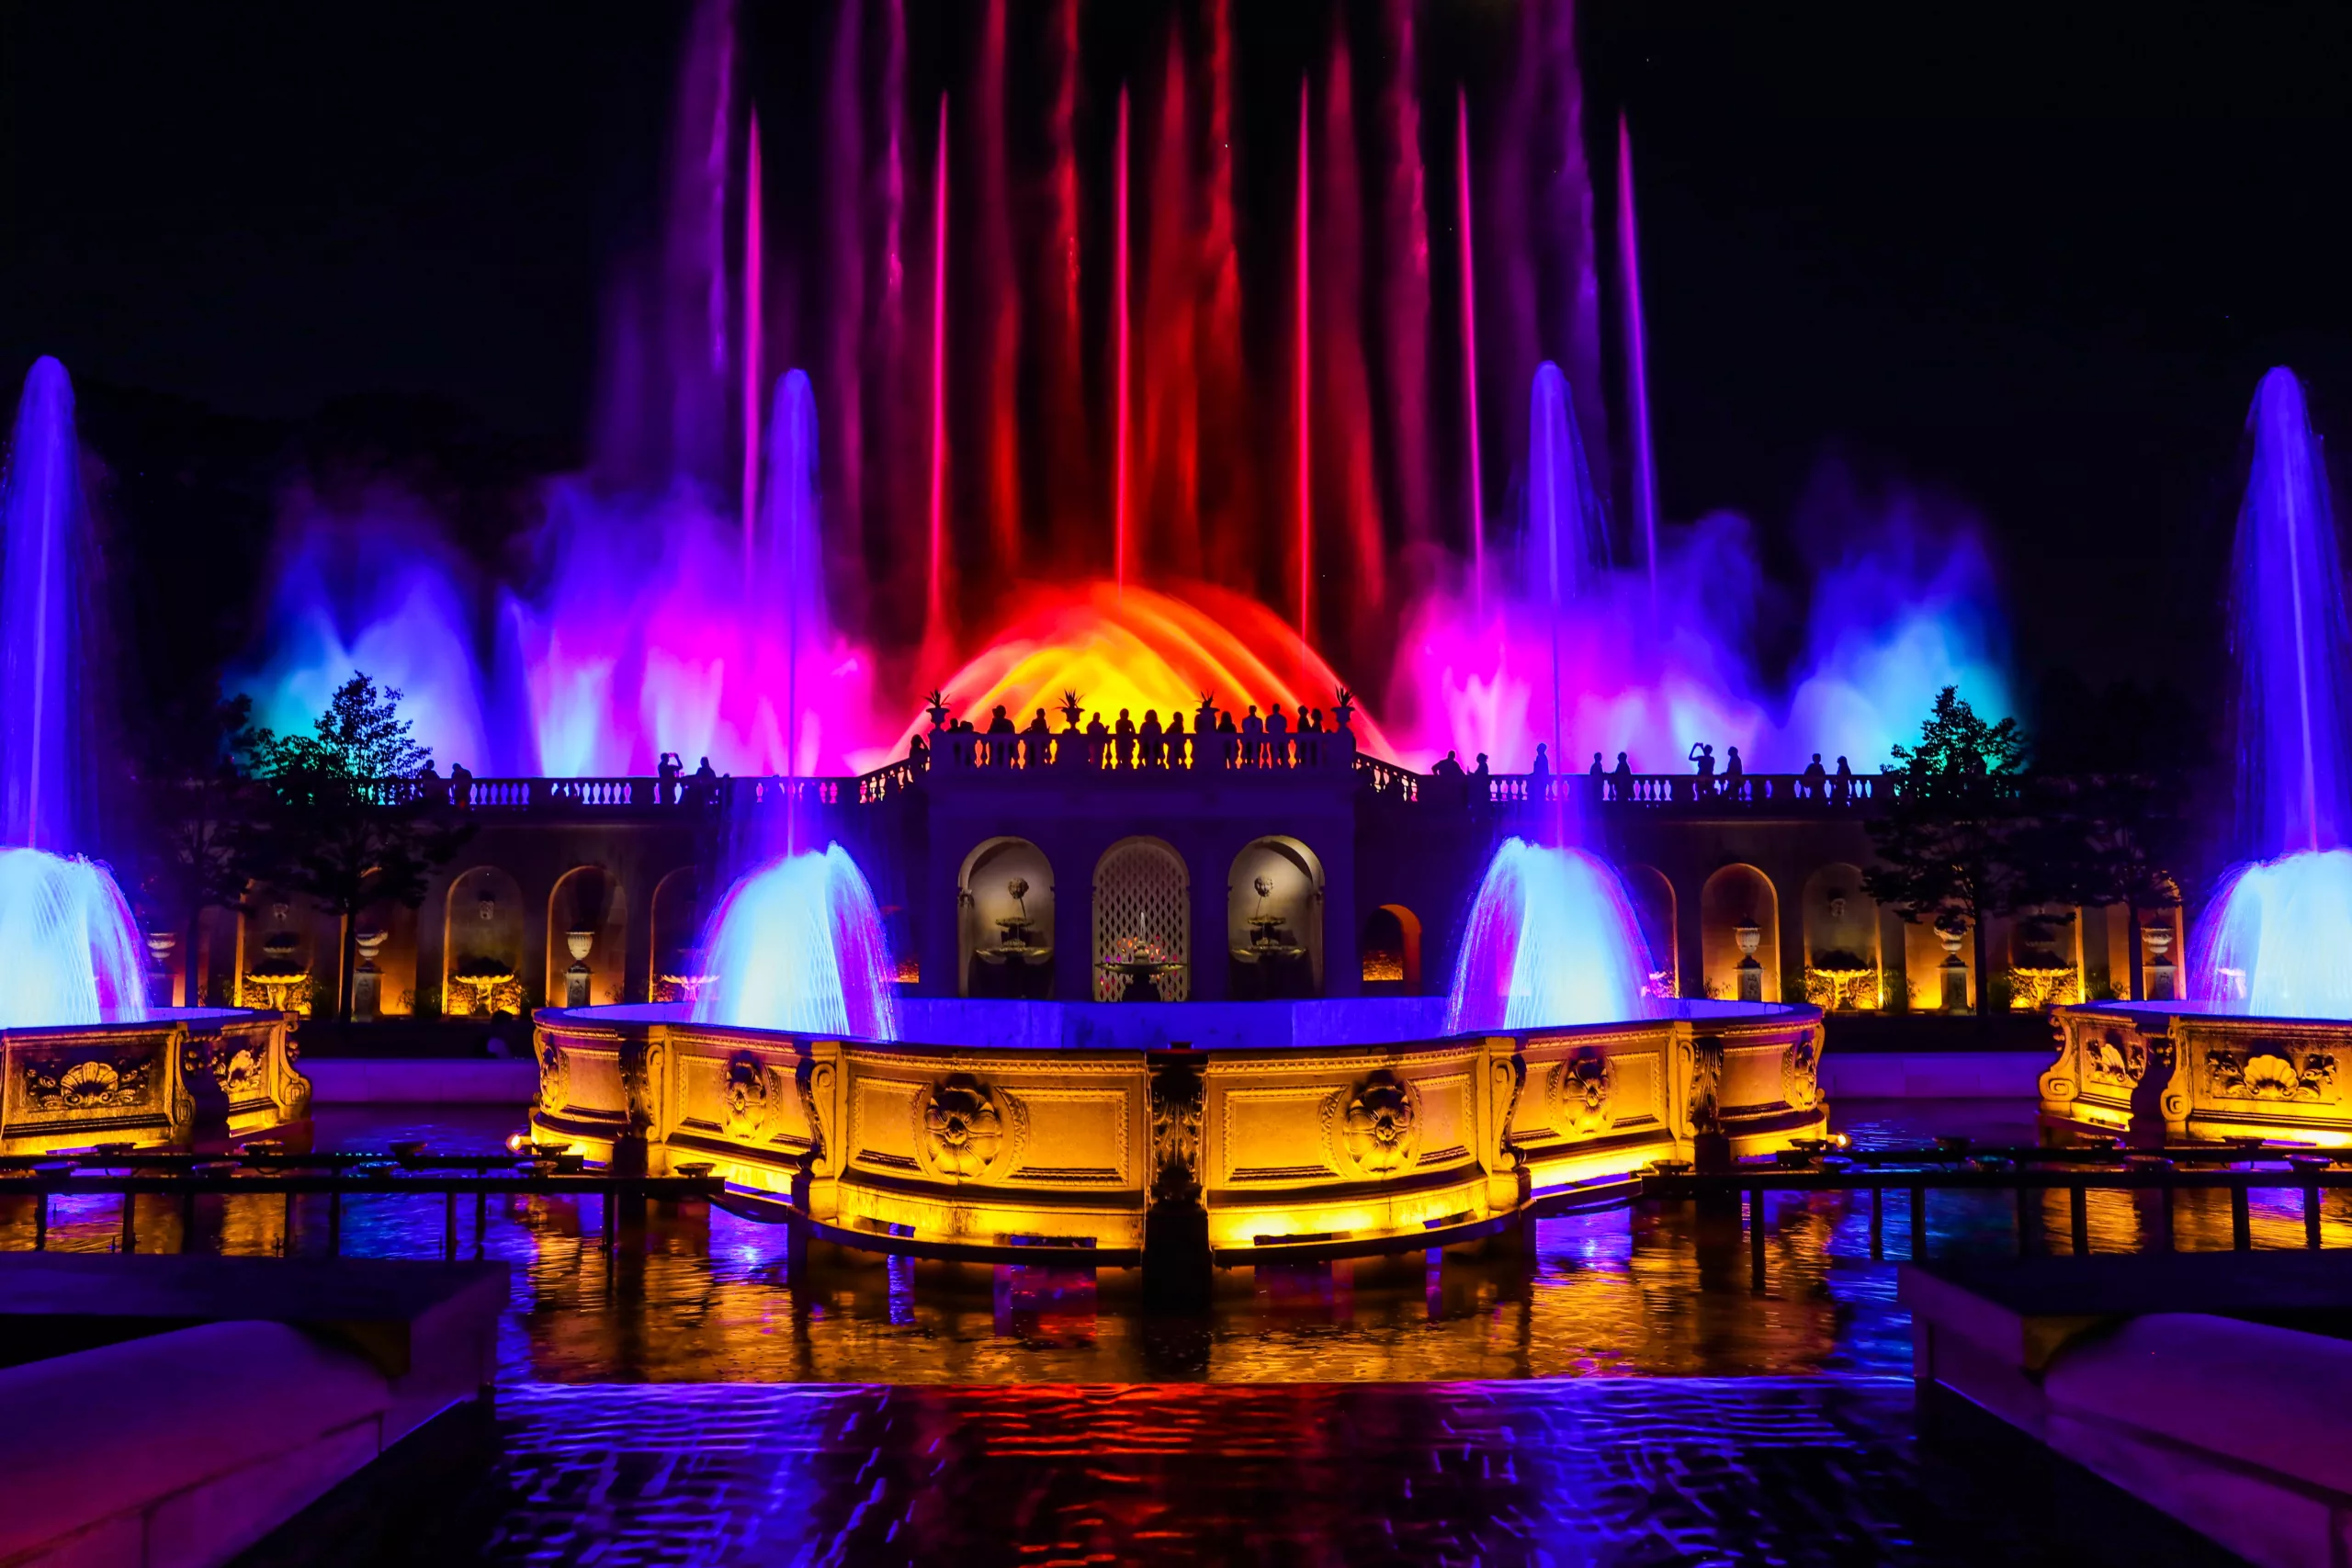 A colorful fountain and light show held at Longwood gardens during summer nights.